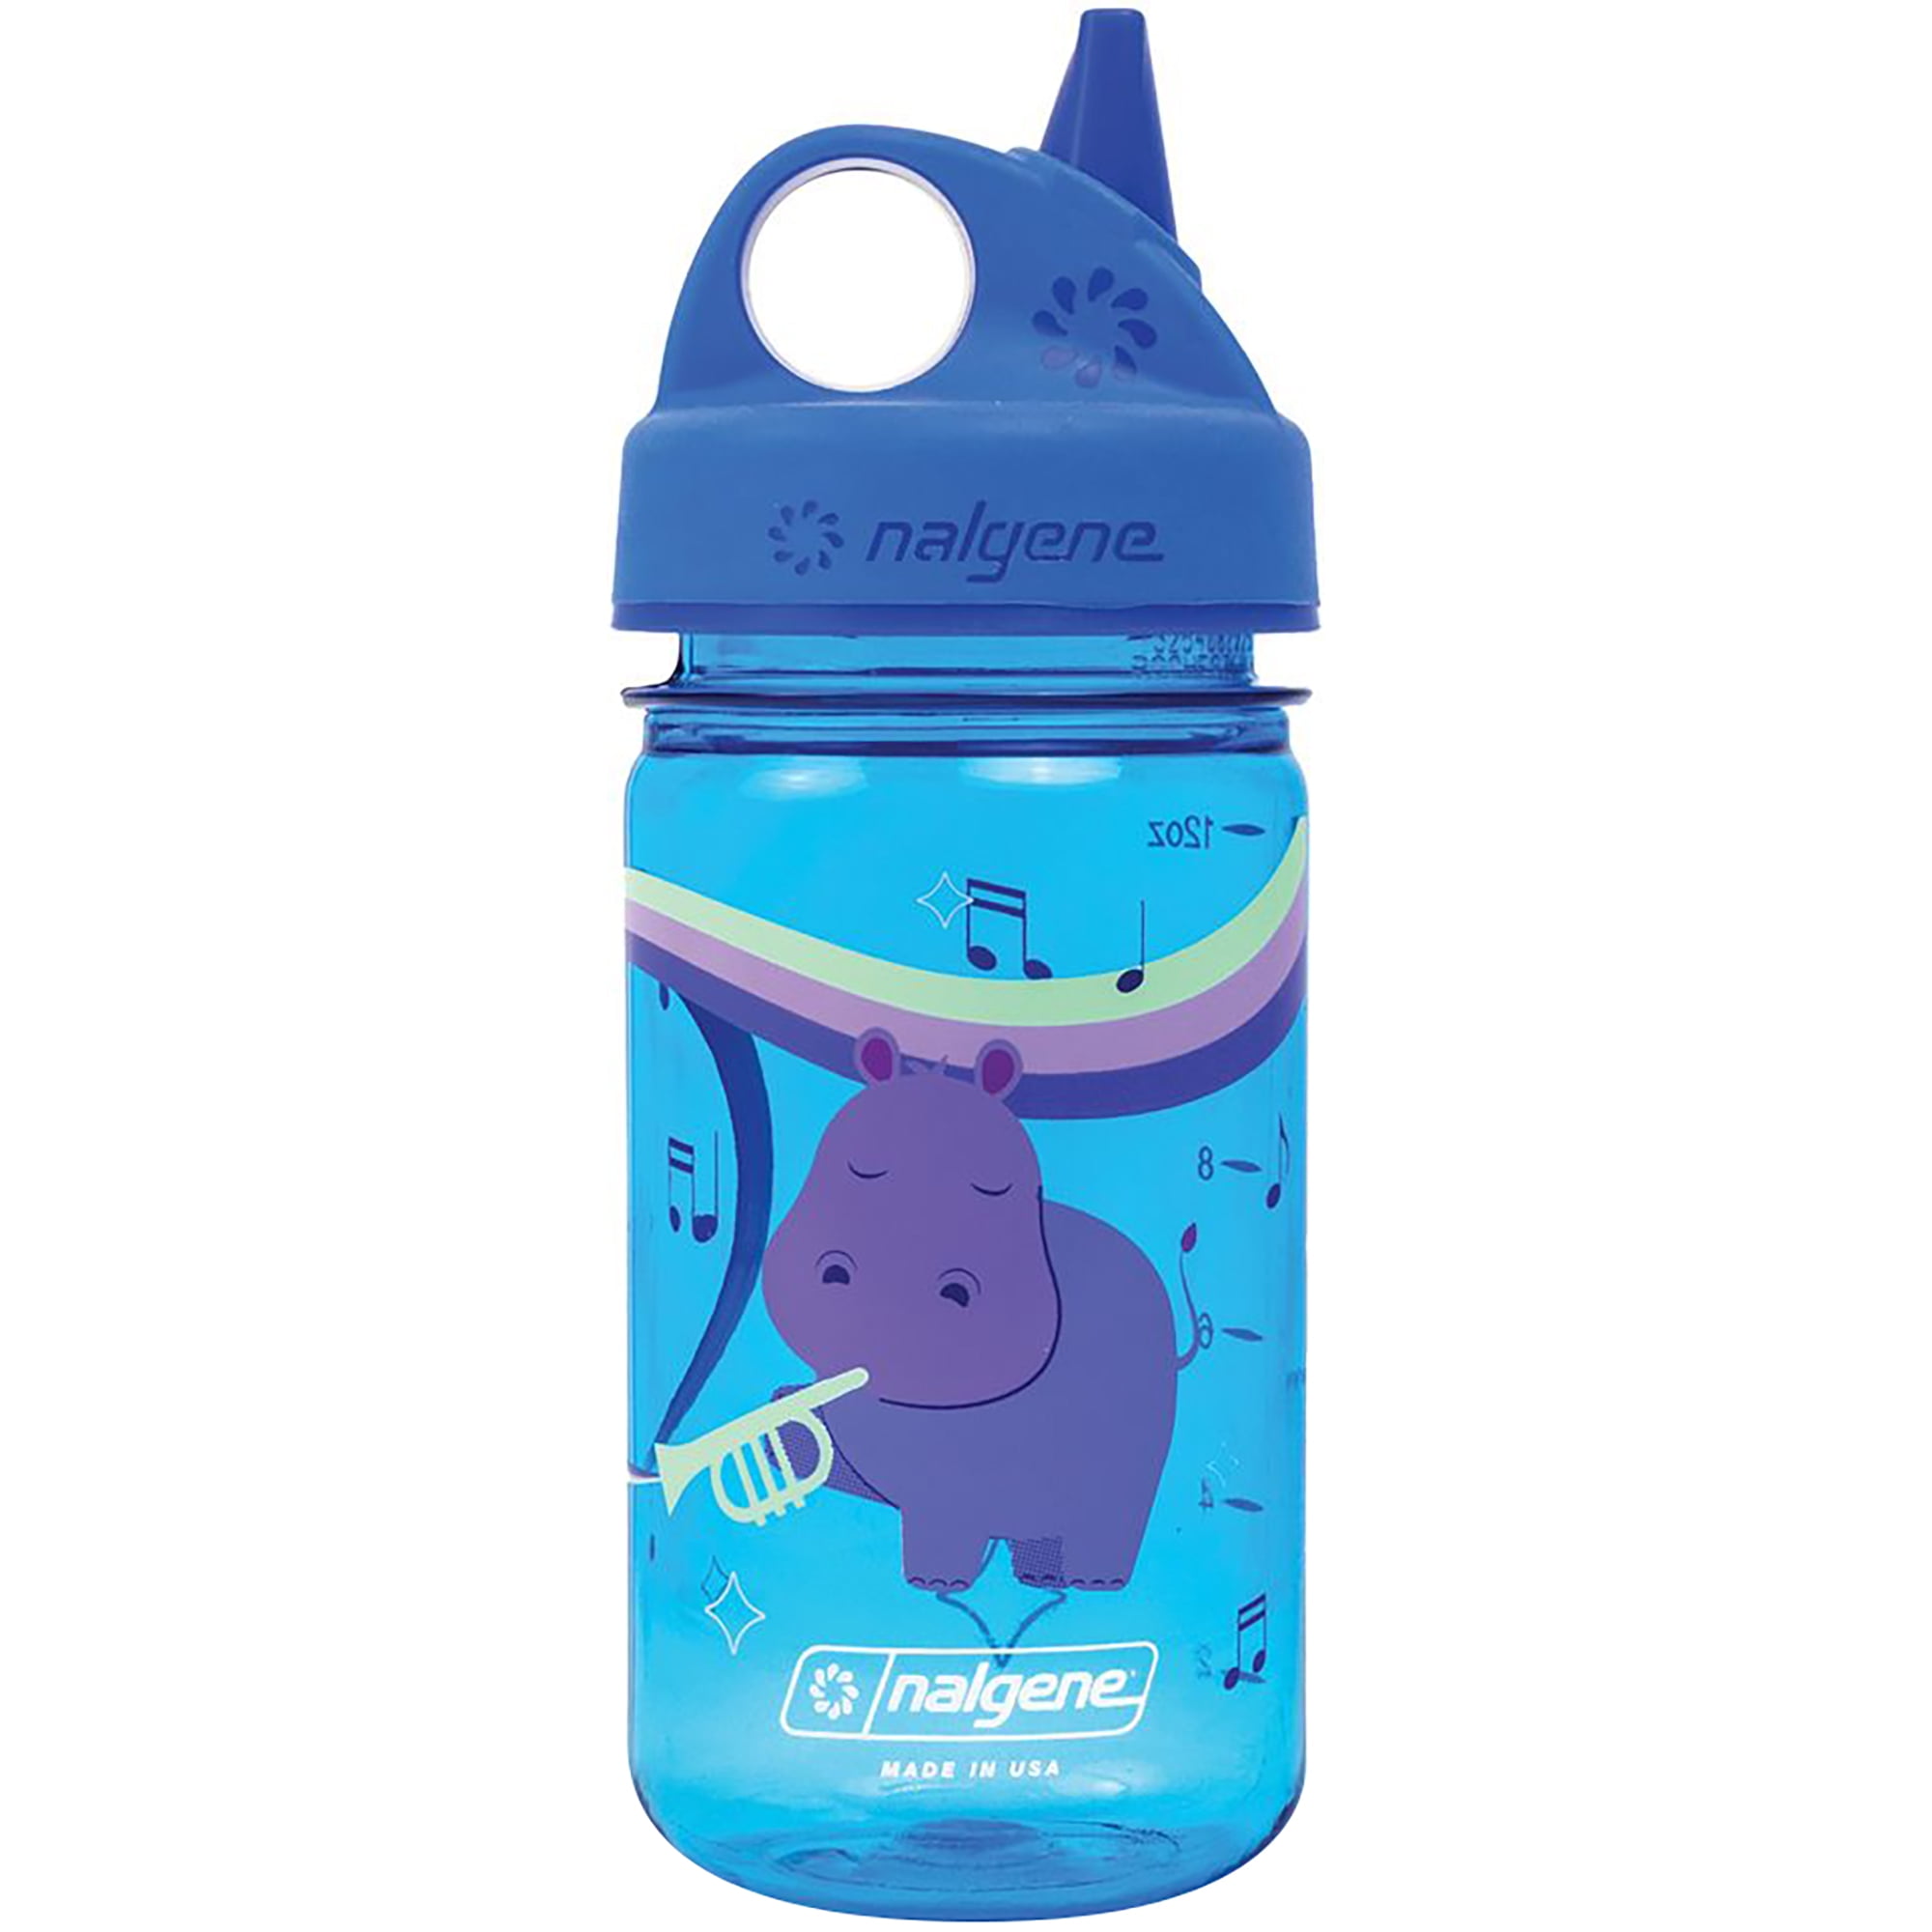  MEM WORLDSHOP Sustainable Tritan Grip-N-Gulp Water Bottle, 12  oz - 2 Pack (Purple) - Grip-N-Gulp Water Bottles, Leak Proof Sippy Cup,  Durable, Dishwasher Safe, Reusable and Sustainable, 12 Ounces : Baby